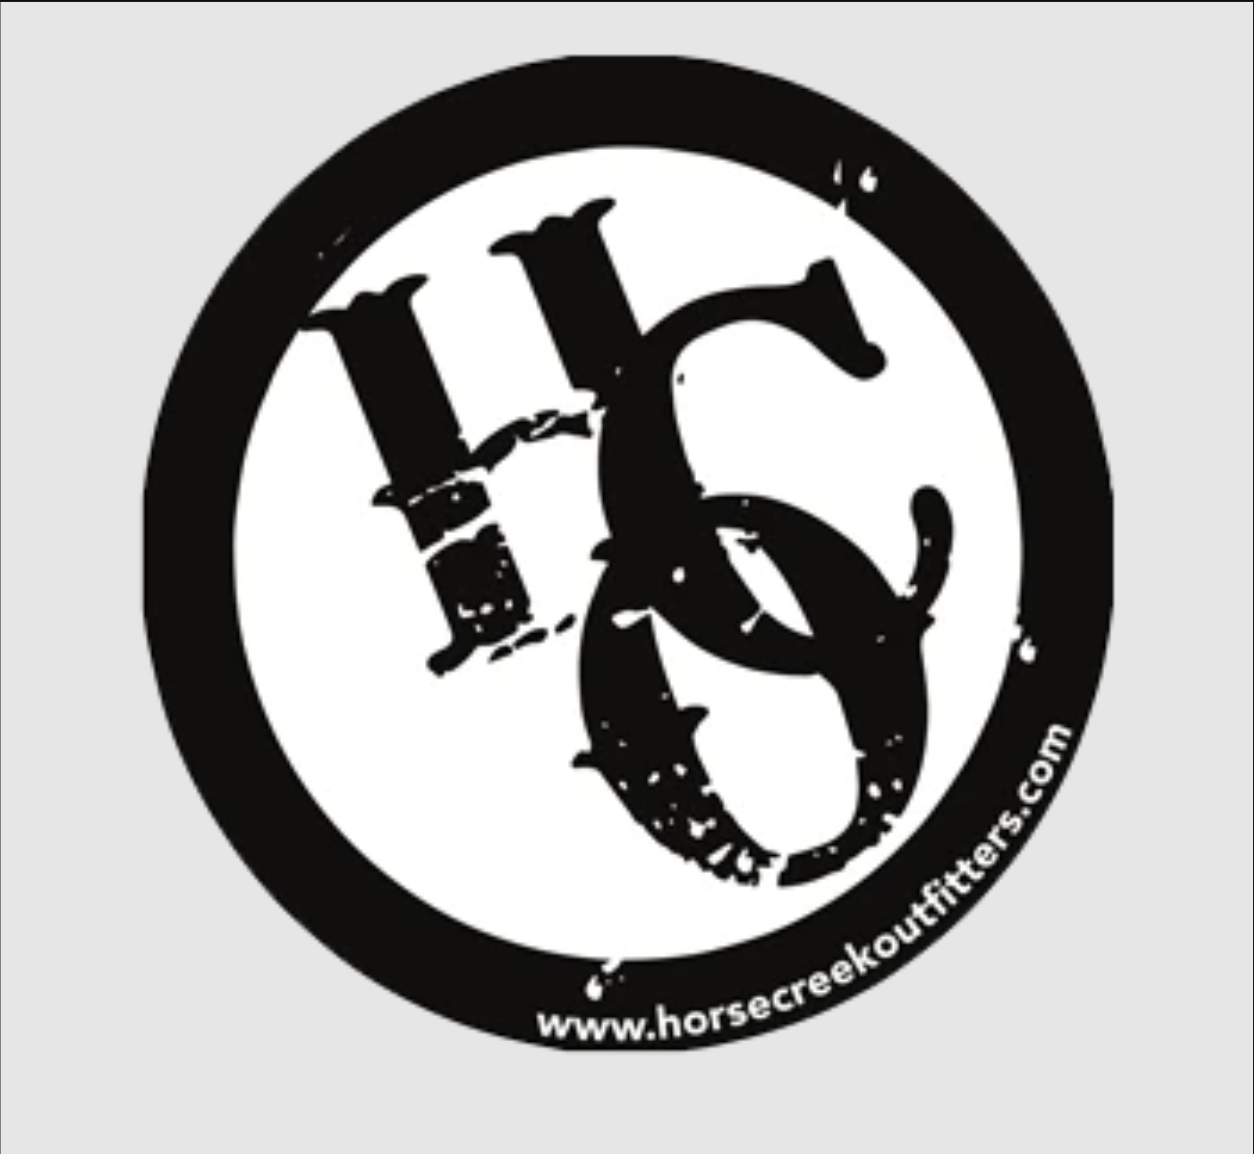 Company logo of Horse Creek Outfitters